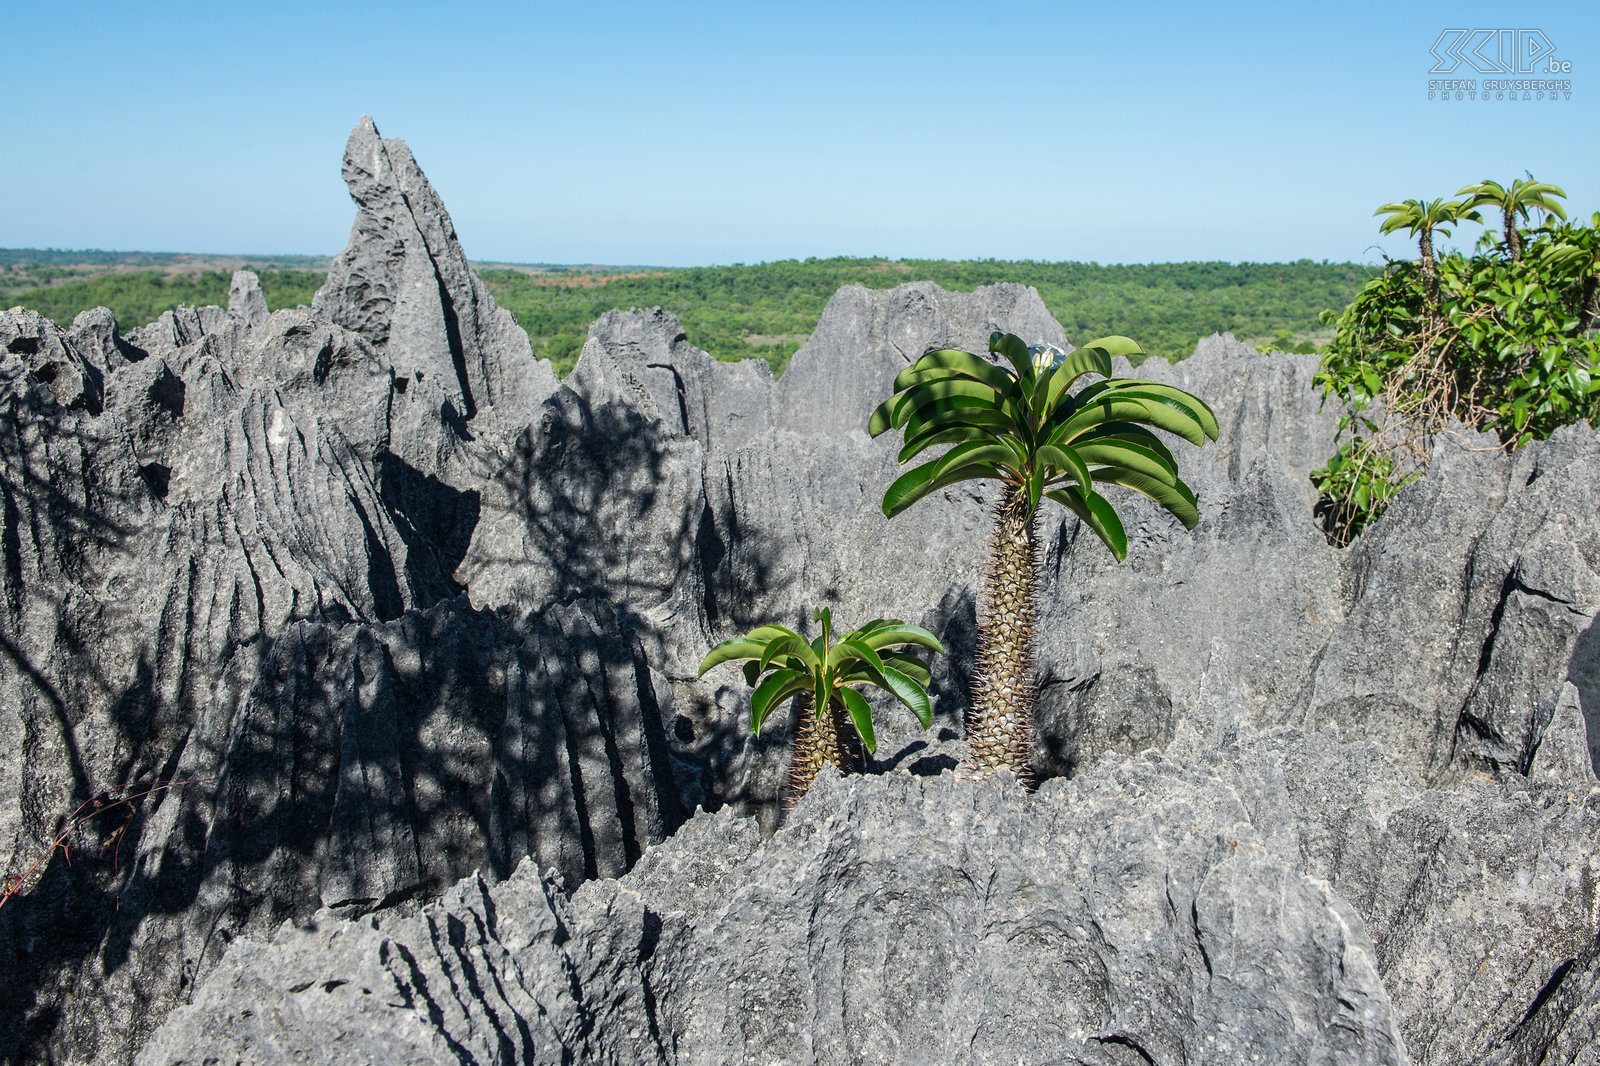 Big Tsingy - Ranotsara Tsingy de Bemaraha in western Madagascar is a remarkable geological phenomena and unique and spectacular national park. The park is an impenetrable labyrinth of needle-shaped limestone formations. The park has two regions; the ‘big/grand’ tsingy and the ‘small/petit’ tsingy. The first day I visited the big tsingy and I hiked the full circuit, a trail of almost 6 hours. I started with a climb to the the viewpoint of Ranotsara, then I walked through the forests in the canyons called ‘broadway’ and climbed and crawled through the cave. I ended with a climb to the spectacular Andamozavaky viewpoint.  Stefan Cruysberghs